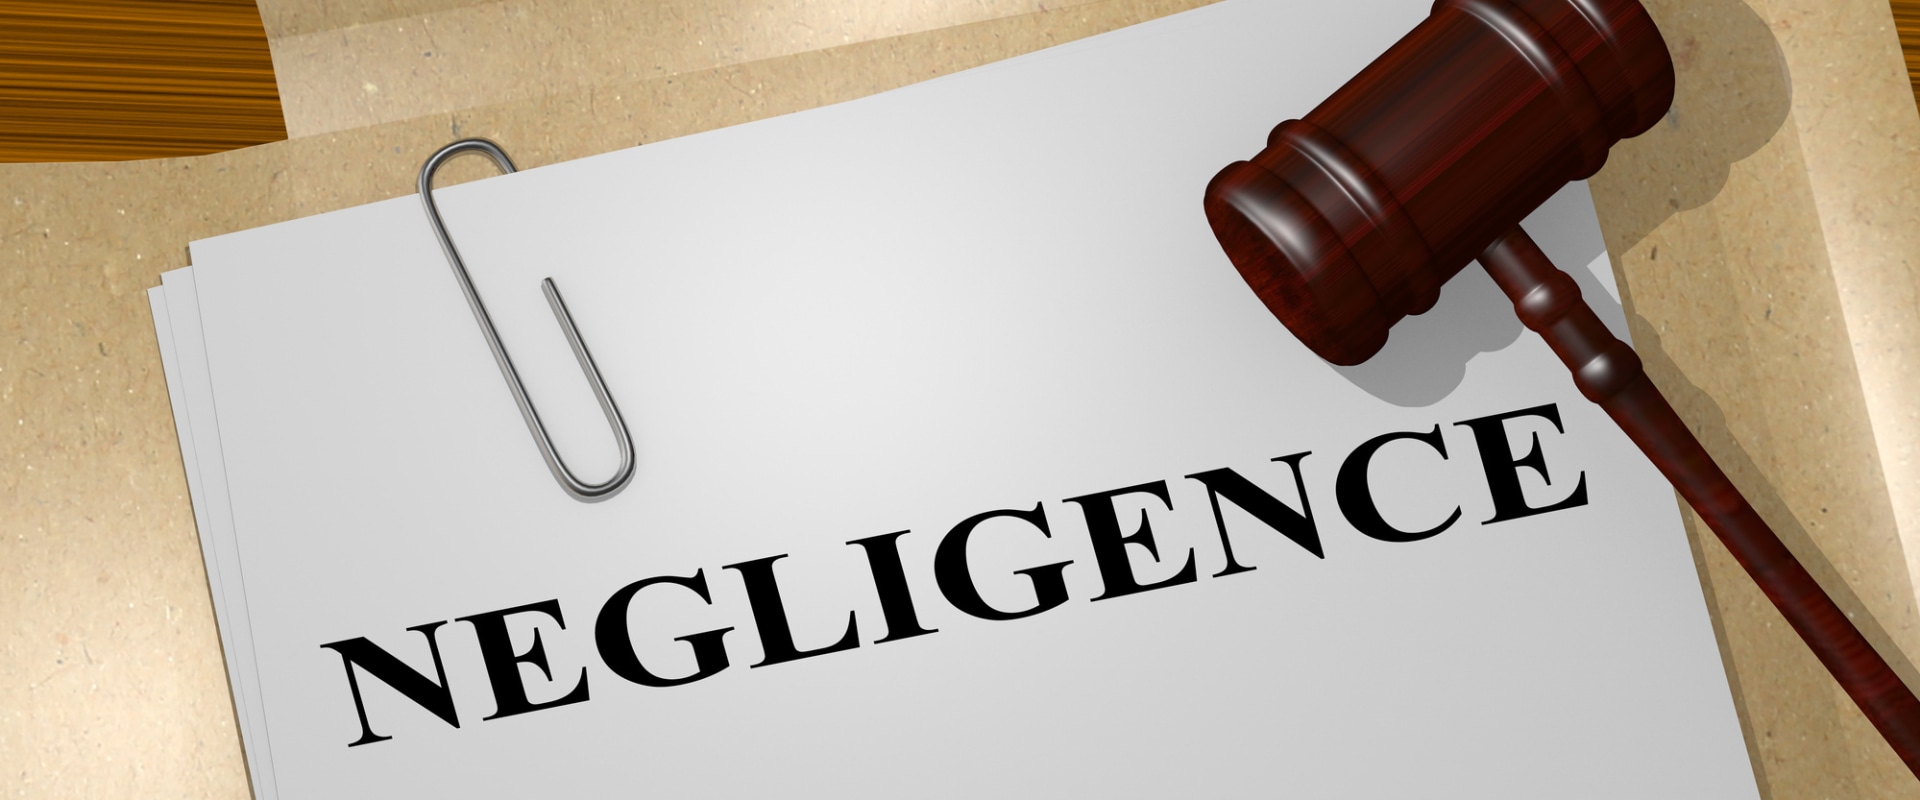 Which element of negligence do you think might be the most difficult to prove and why?